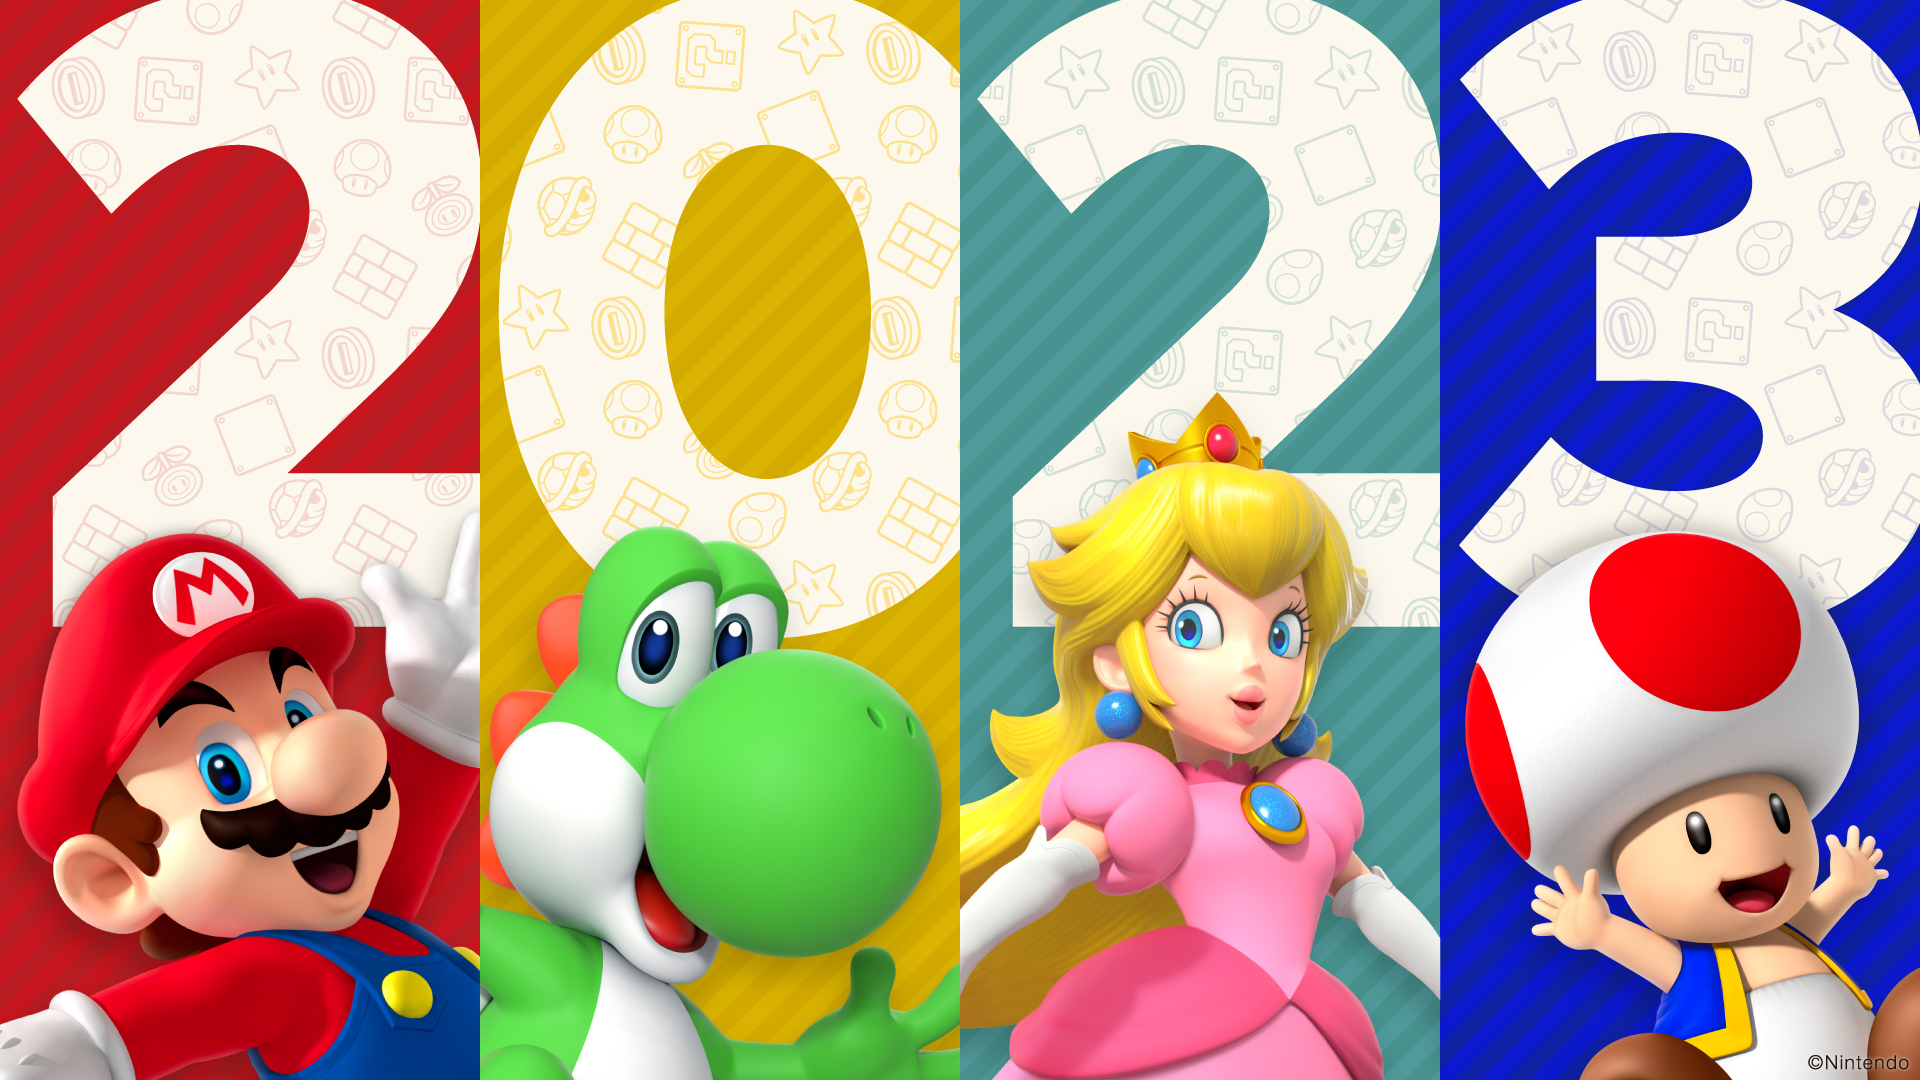 General 1920x1080 Nintendo Mario Yoshi Toad (character) video games New Year video game characters numbers 2023 (year)